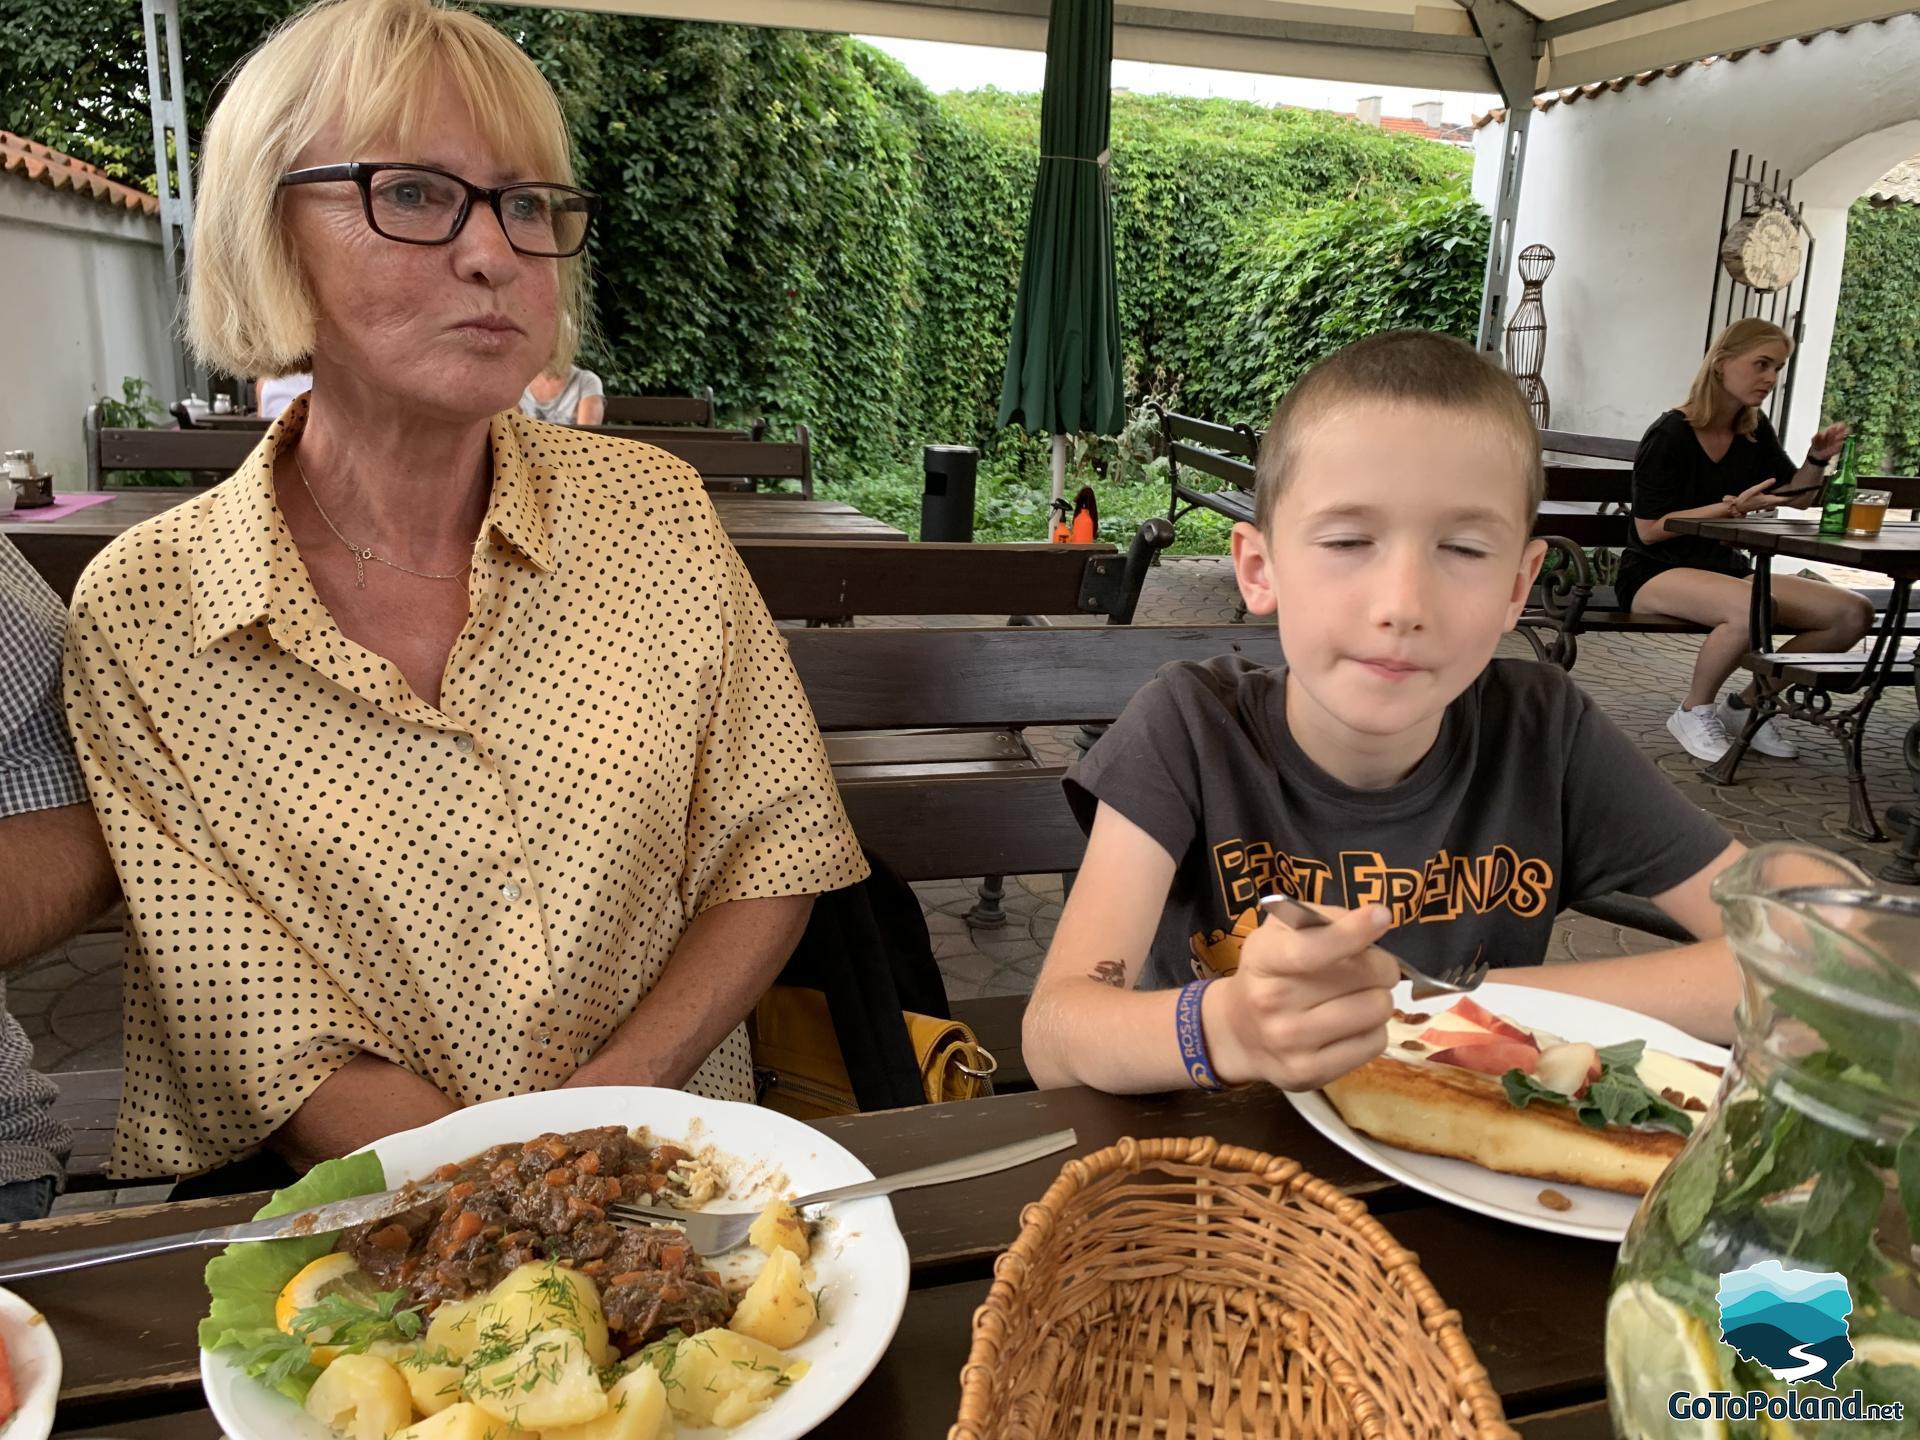 a woman and a boy are sitting at a table in a restaurant outdoors, the woman has potatoes and stew on a plate, the boy is eating pancakes, there is a jug with water, mint and lemons on the table